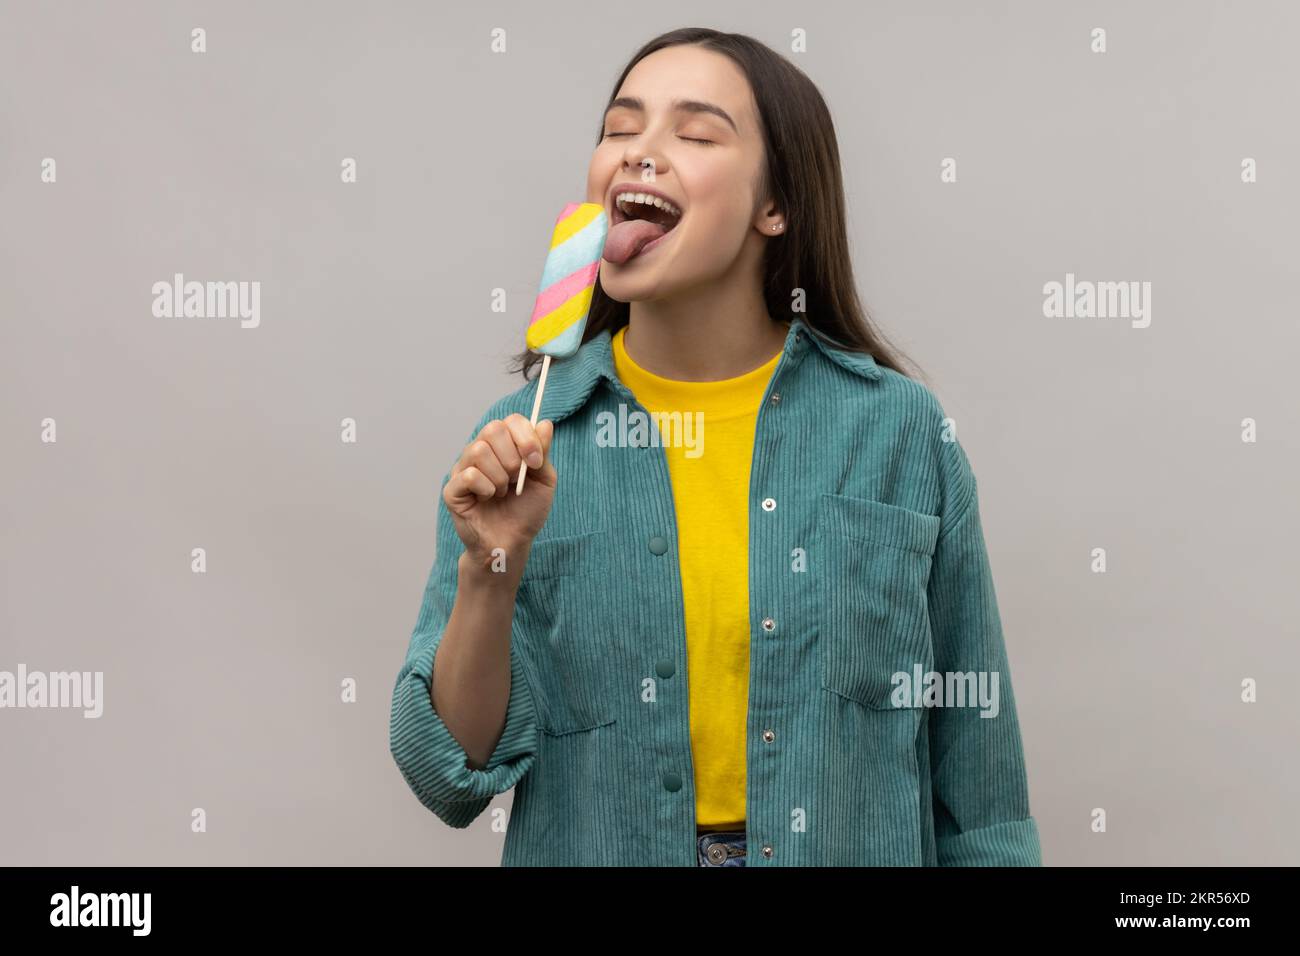 Portrait of positive woman with dark hair licking multicolored ice cream, feels hungry, tasting dessert, wearing casual style jacket. Indoor studio shot isolated on gray background. Stock Photo